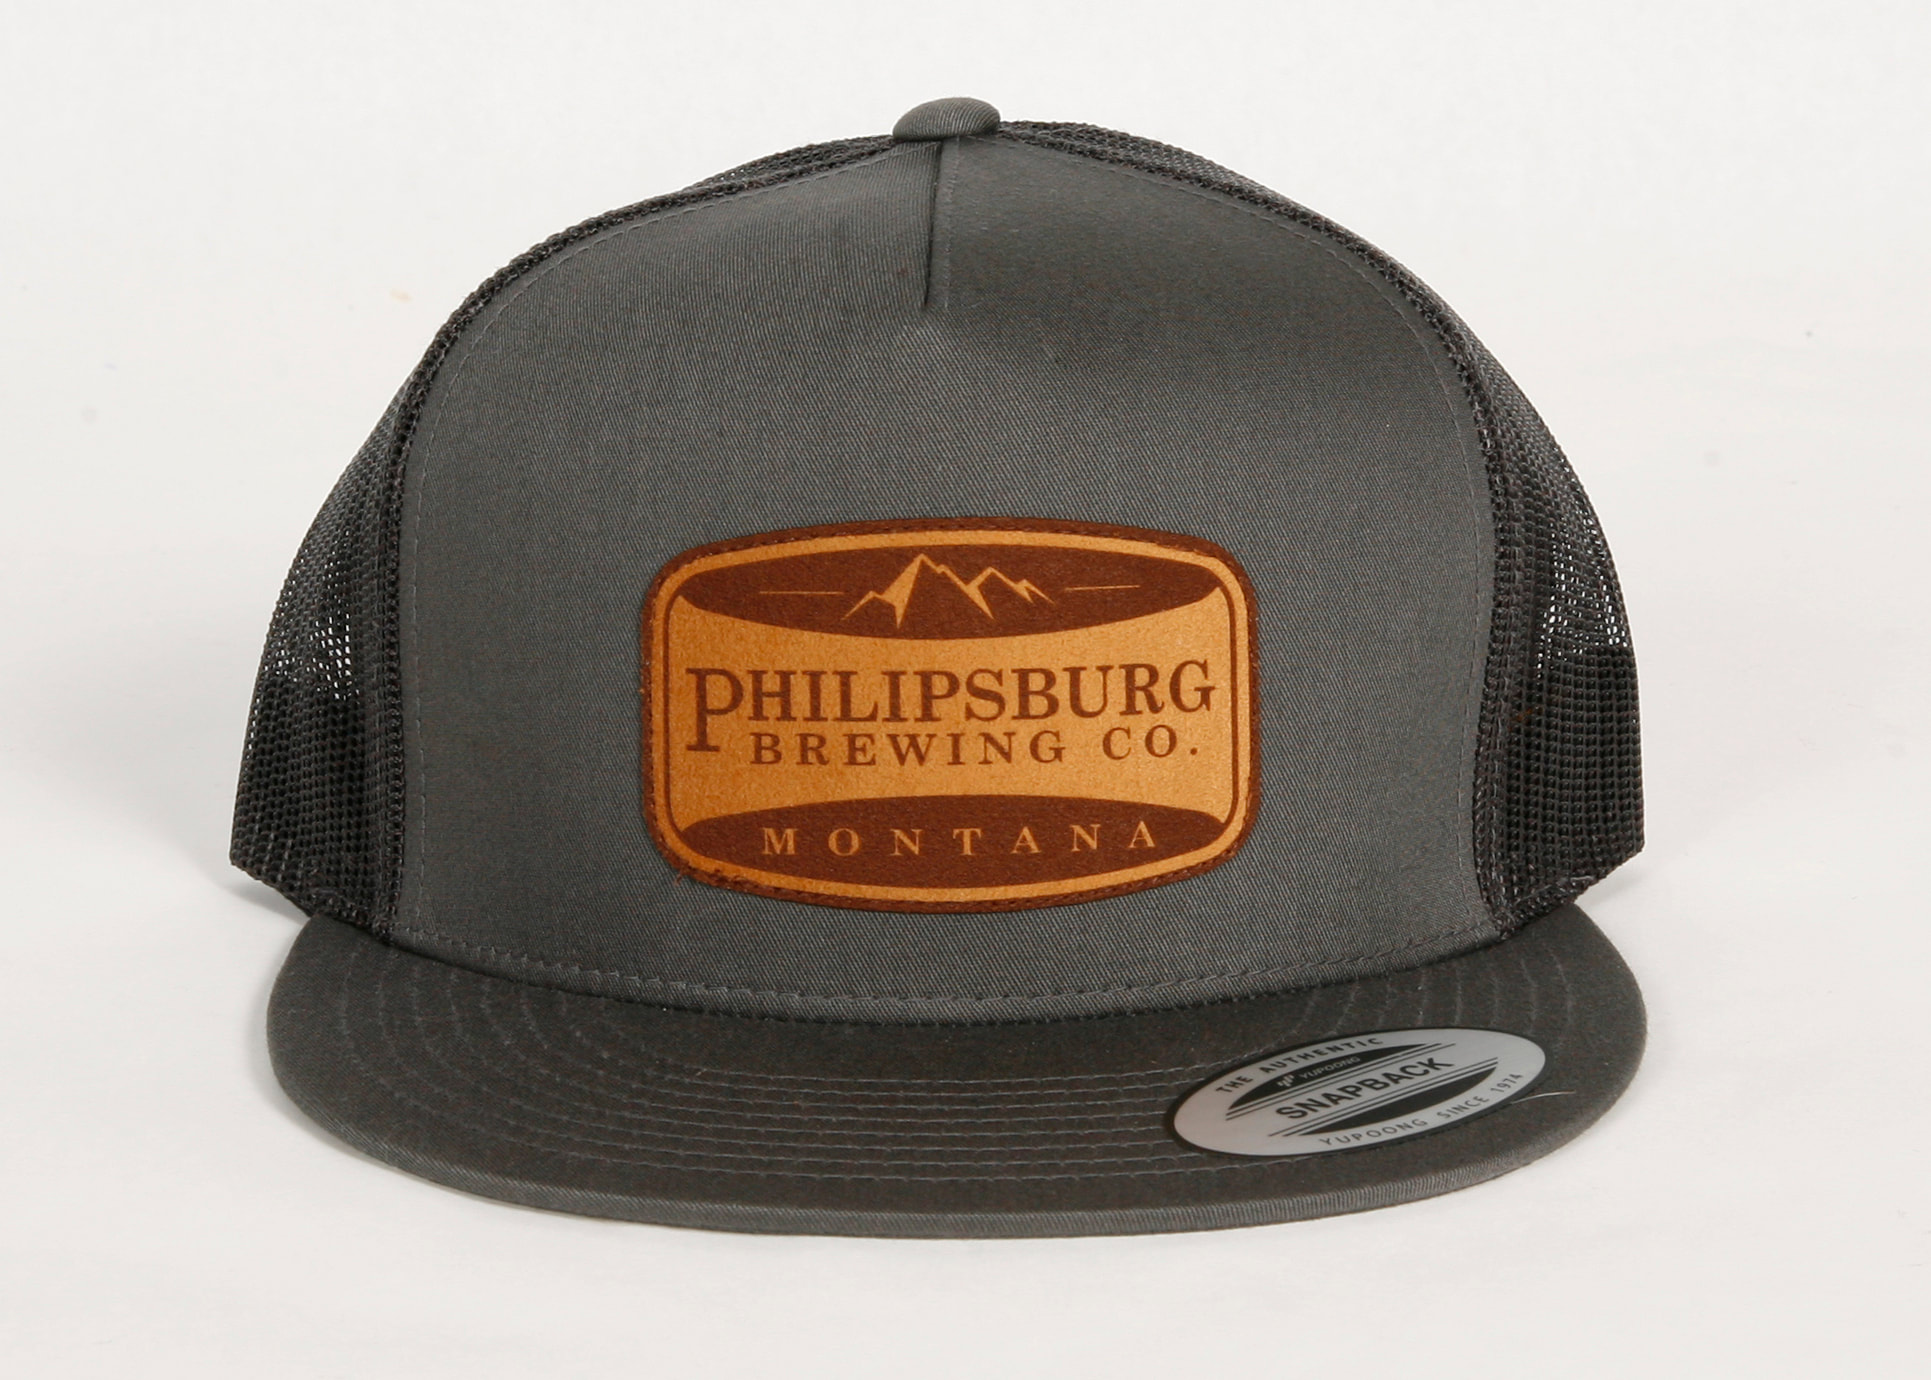 Brewing Philipsburg with Flexfit Trucker Company Suede Patch